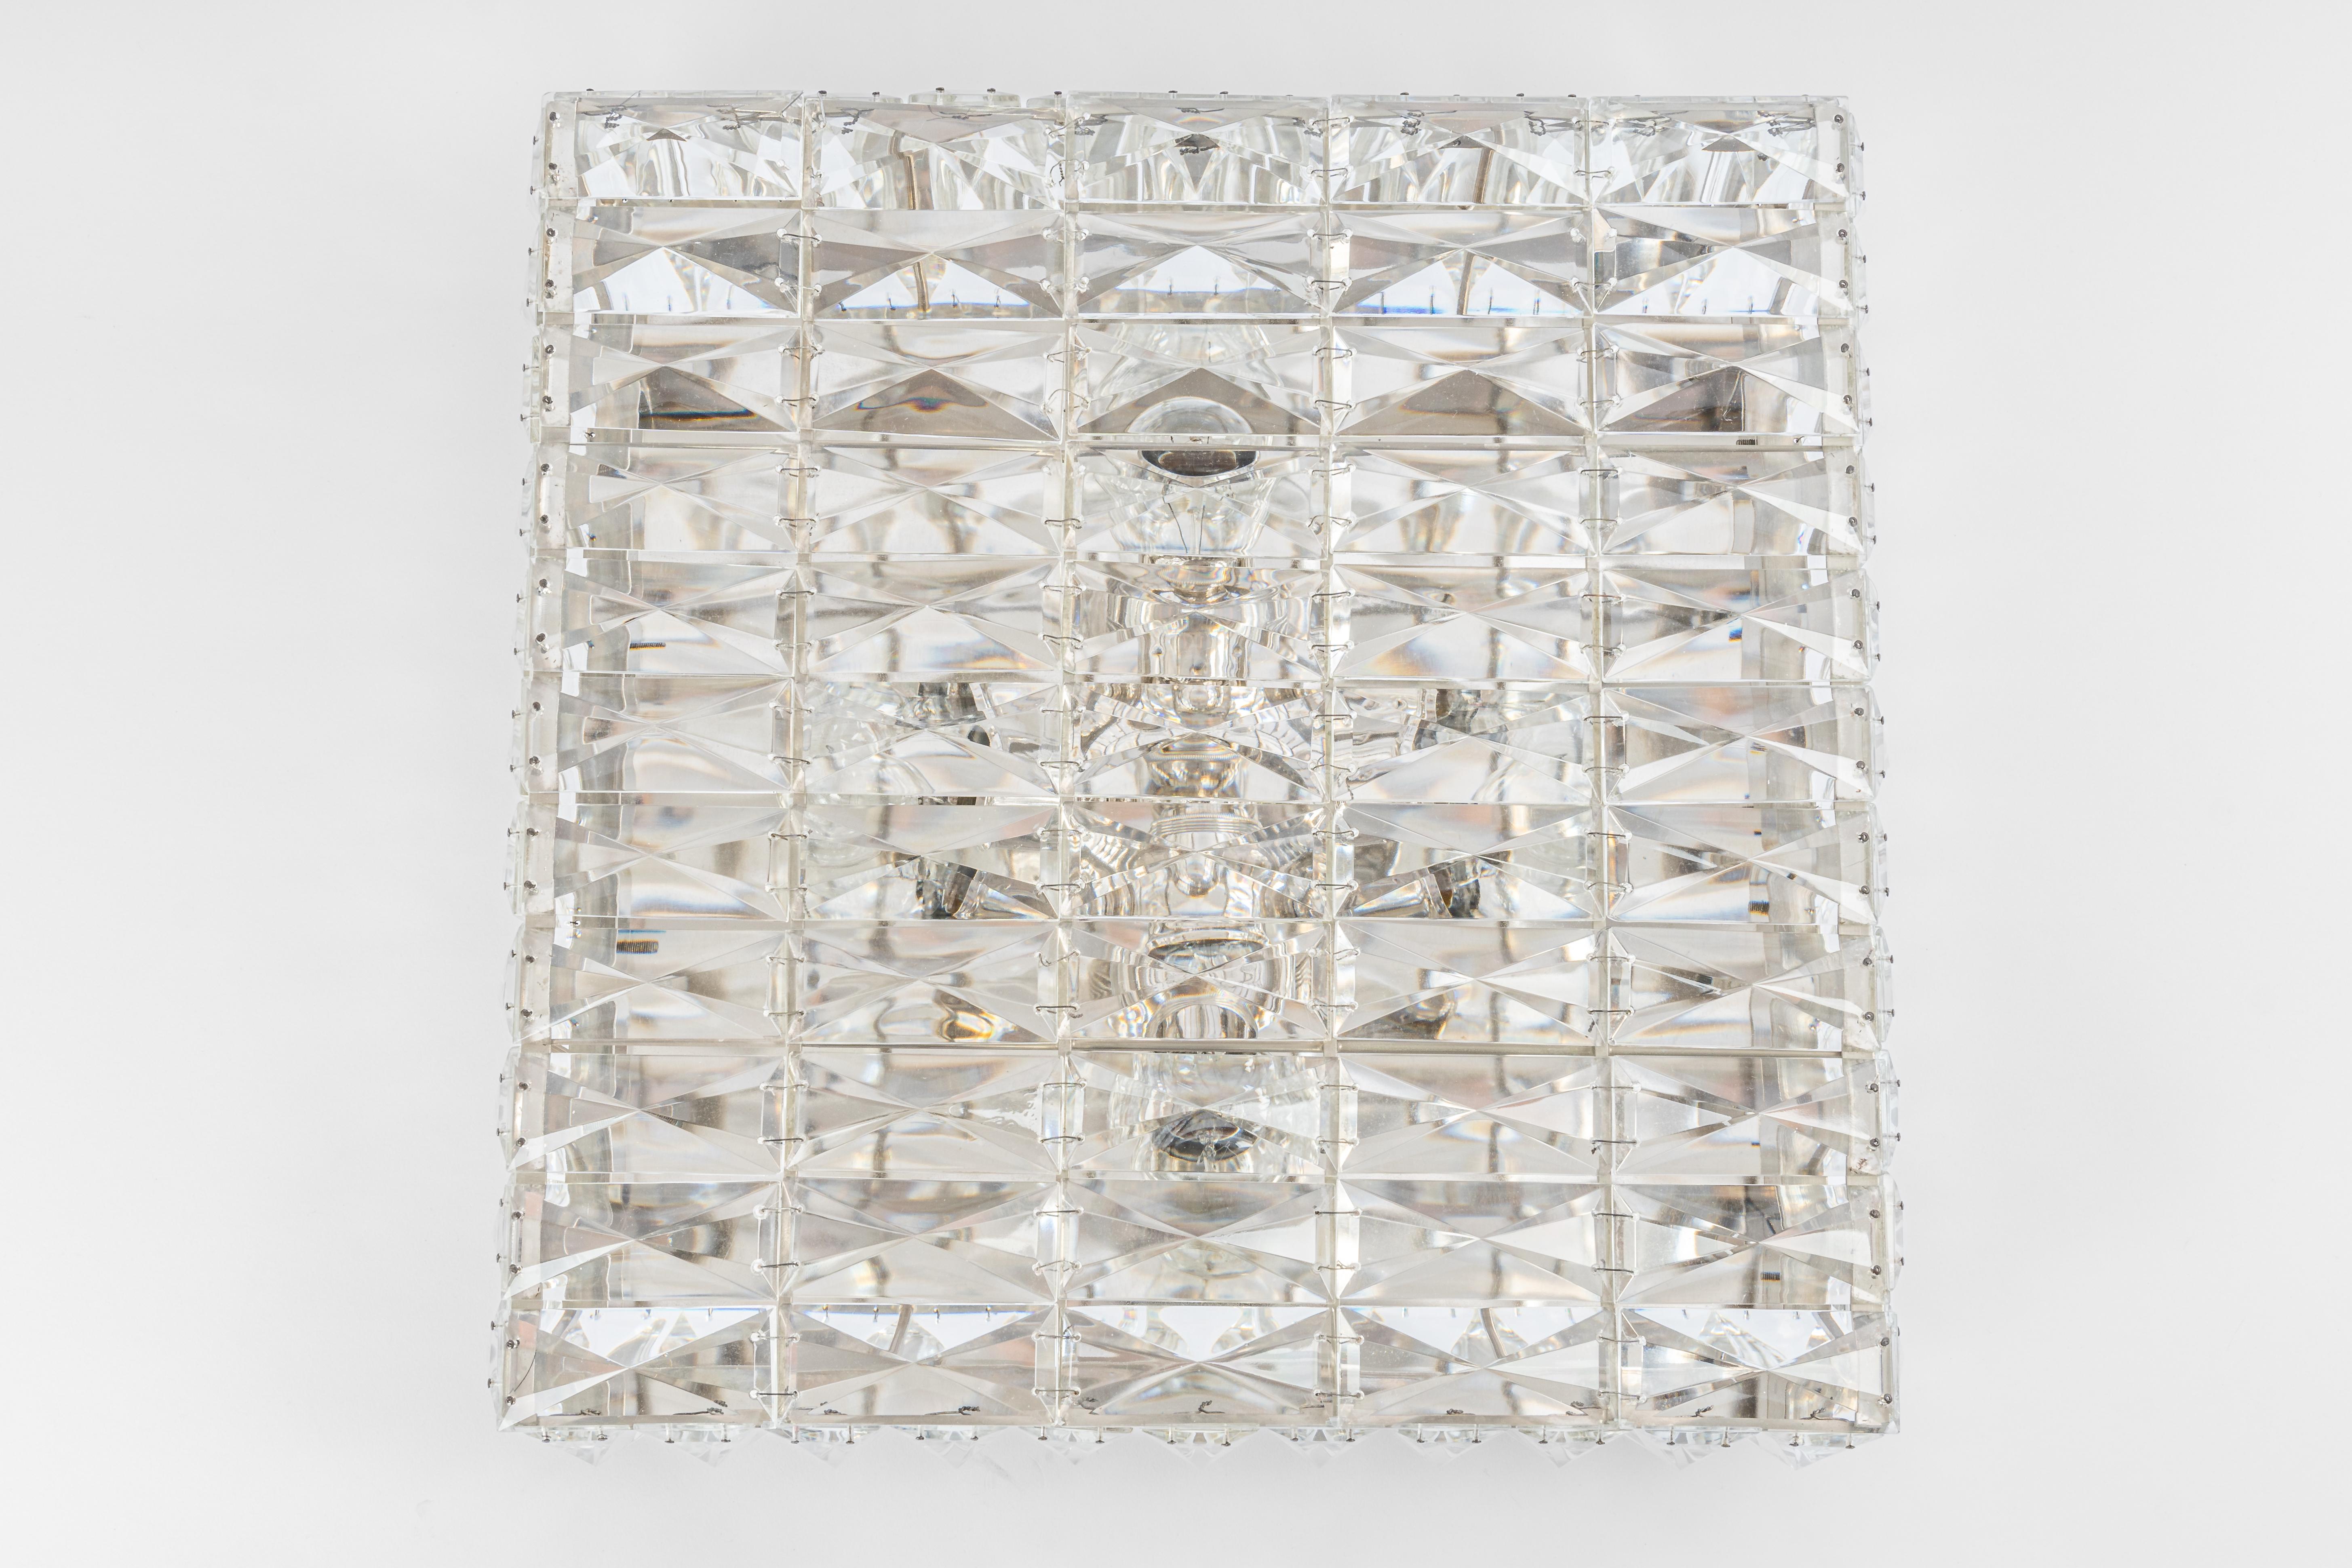 Wonderful light fixture in style of Kinkeldey, Germany, manufactured in circa 1960-1969. The fixture is made of a metal frame with many facetted crystal glass elements.
Measures: Width 16.9 in /43 cm
Height 5.5 in / 14 cm

Sockets: 4 x E27 standard